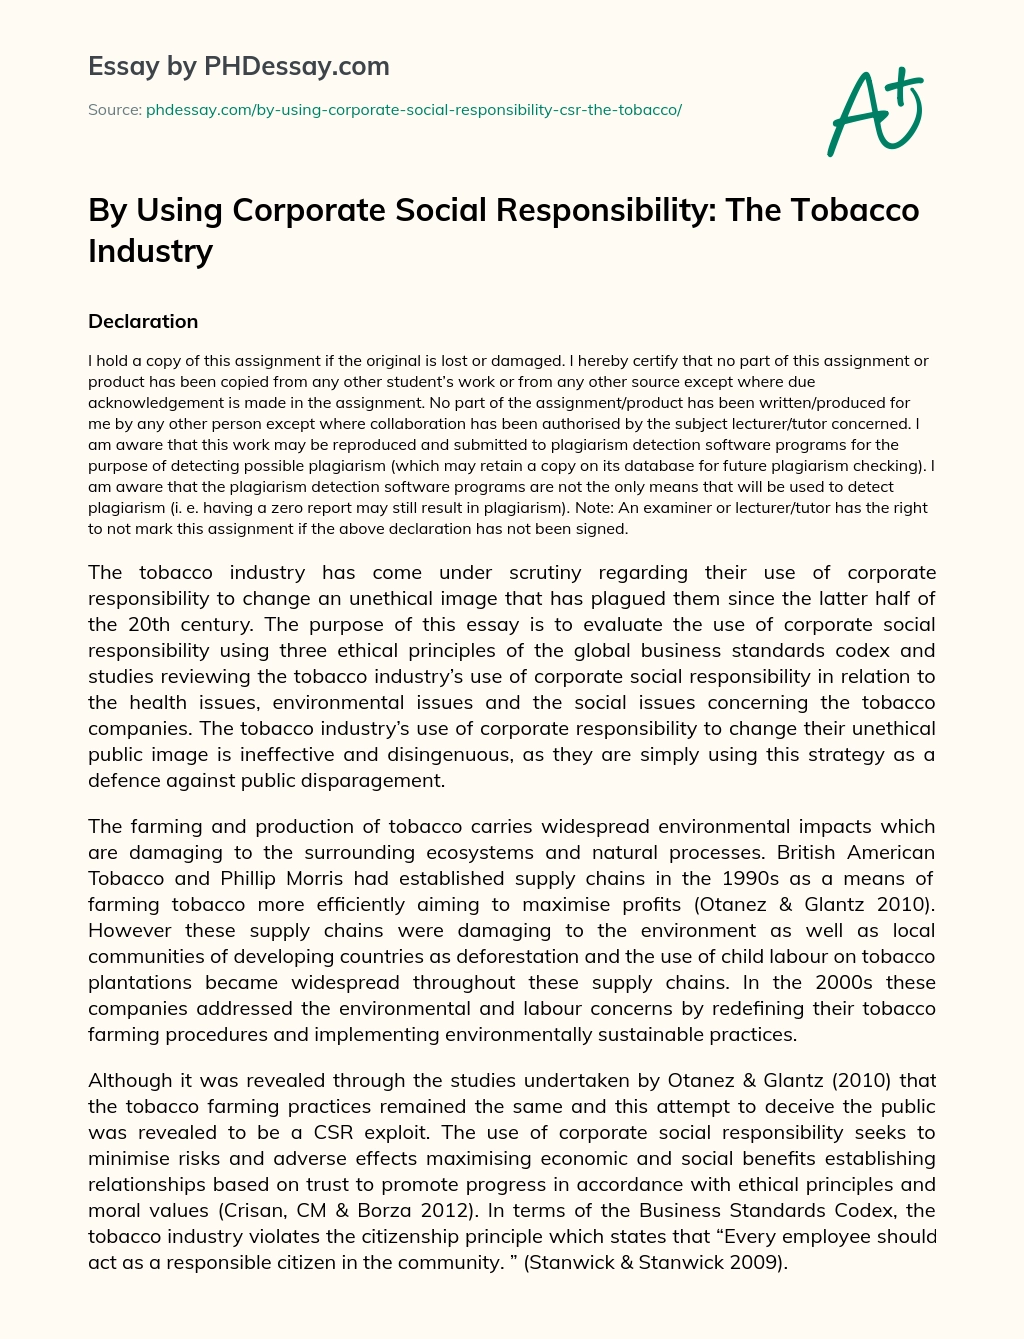 Реферат: Tobacco Companies Essay Research Paper Tobacco companies